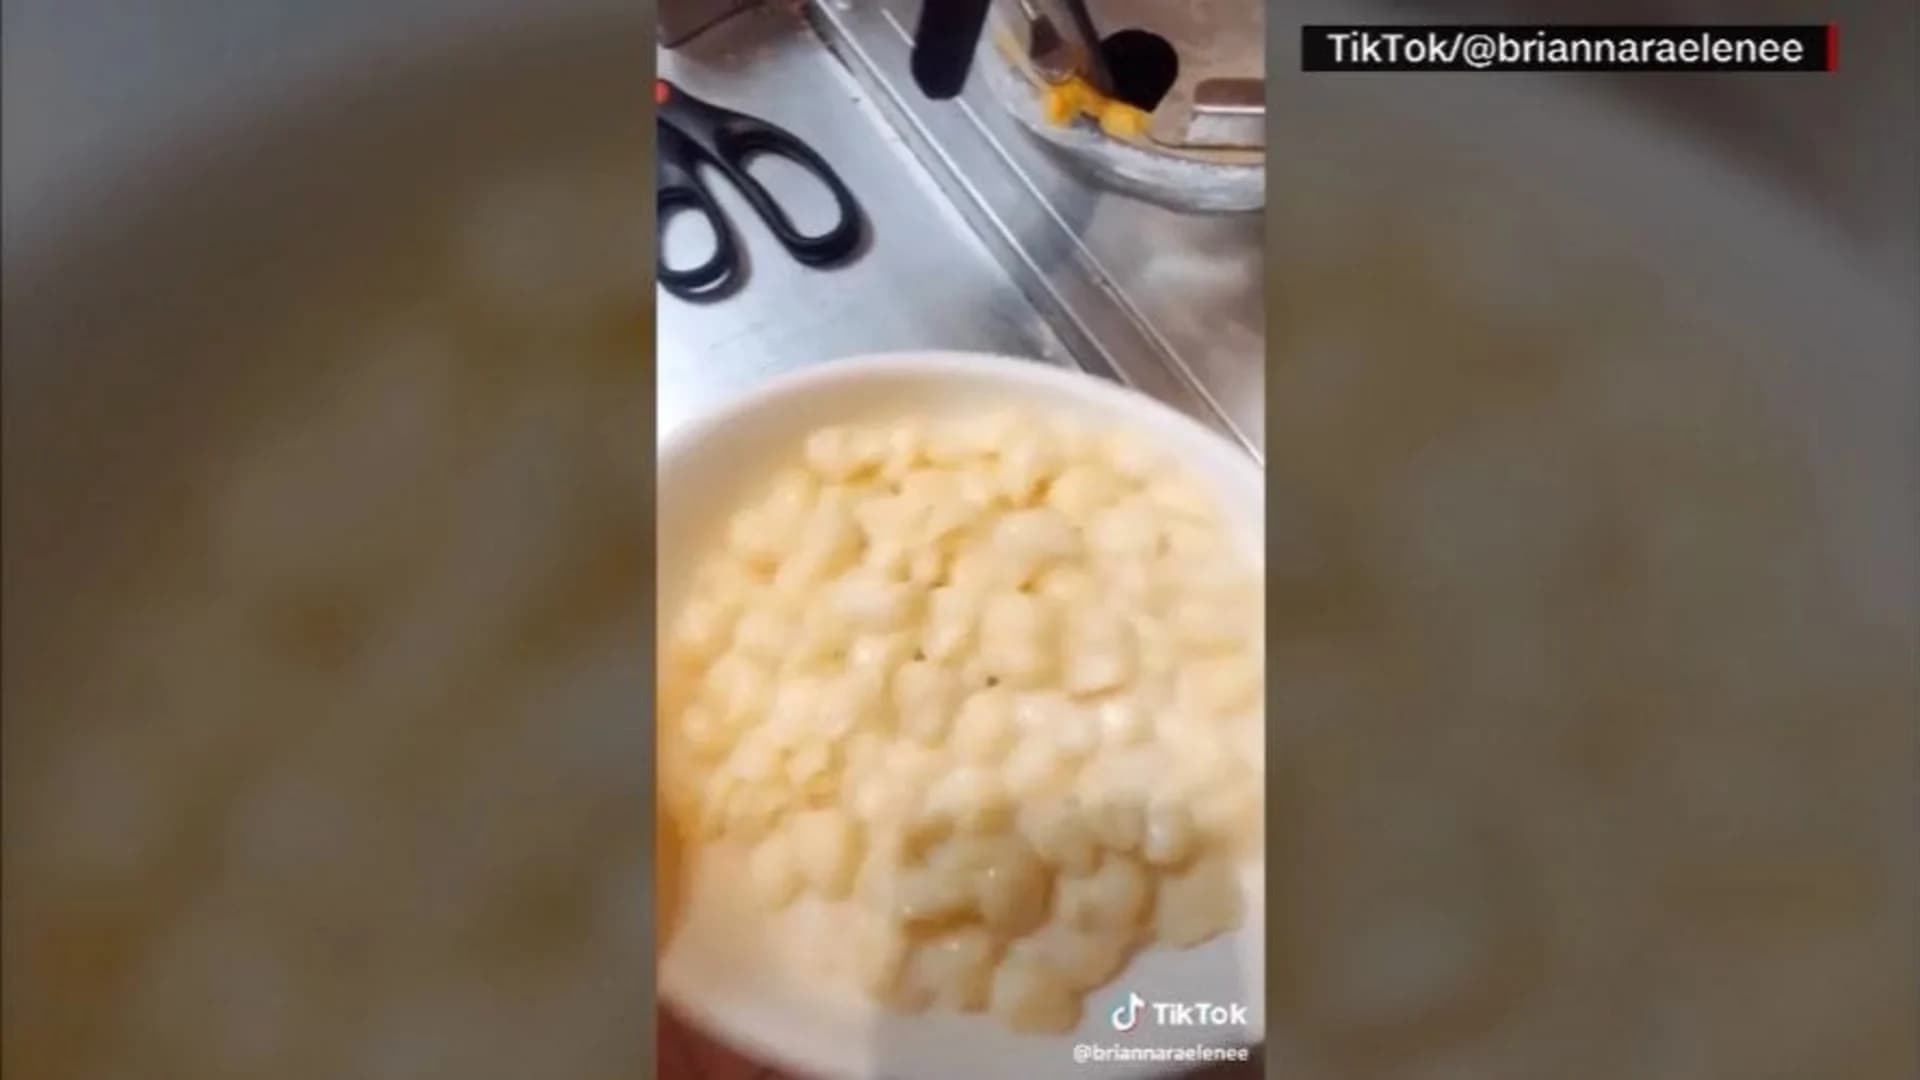 Panera Bread fires worker who posted video showing how mac and cheese is made